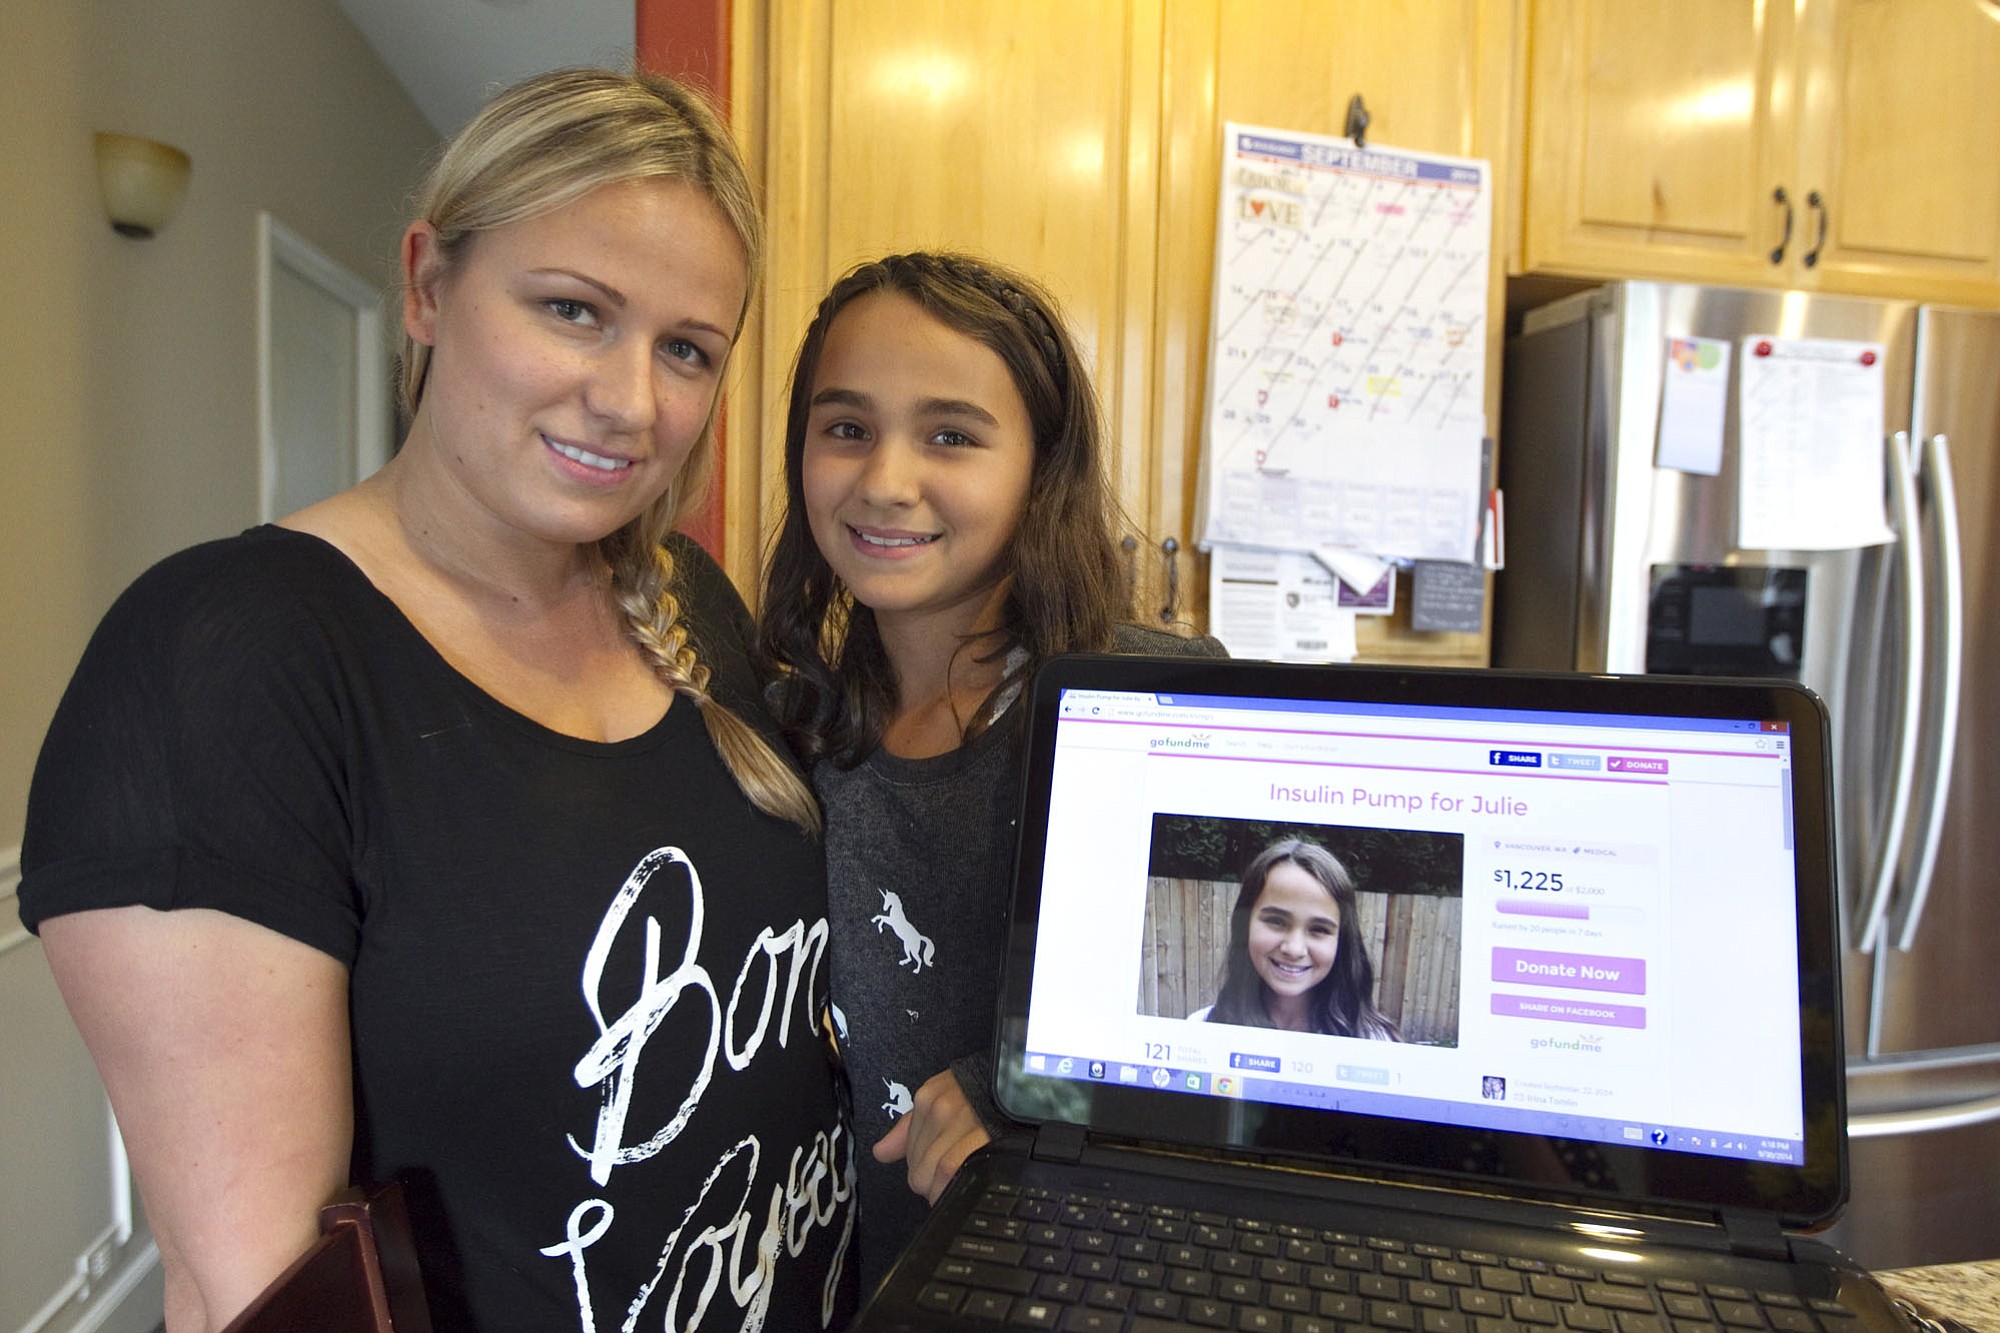 Irina Razumovsky, left, and her daughter Julie Mourao, 10, raised $2,300 through a crowdfunding website to purchase an insulin pump for Julie, to help the Vancouver girl manage her Type 1 diabetes.